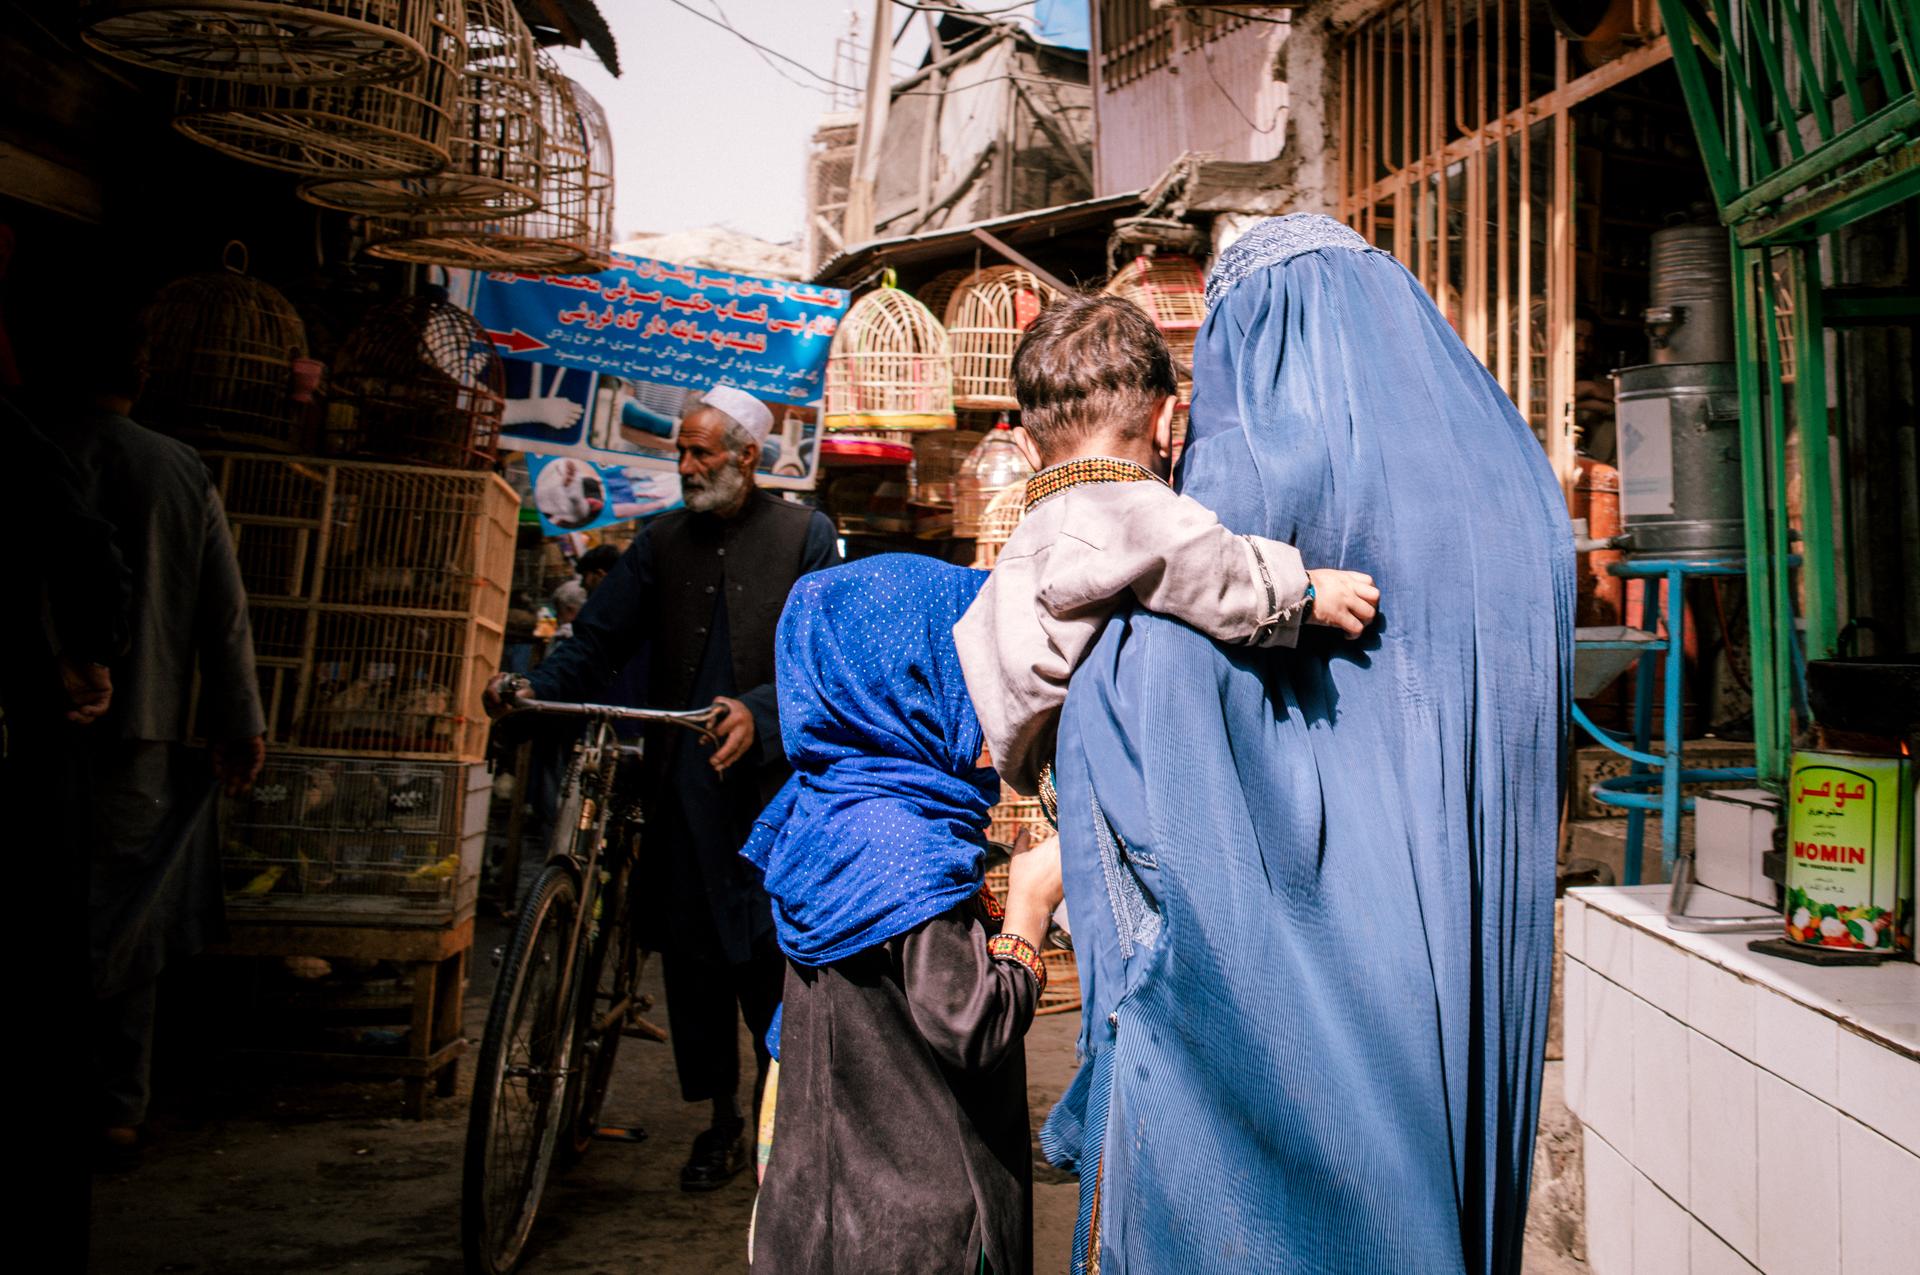 New York Photography Awards Winner - A Terrible Peace: Afghanistan's Descent into Deeper Poverty